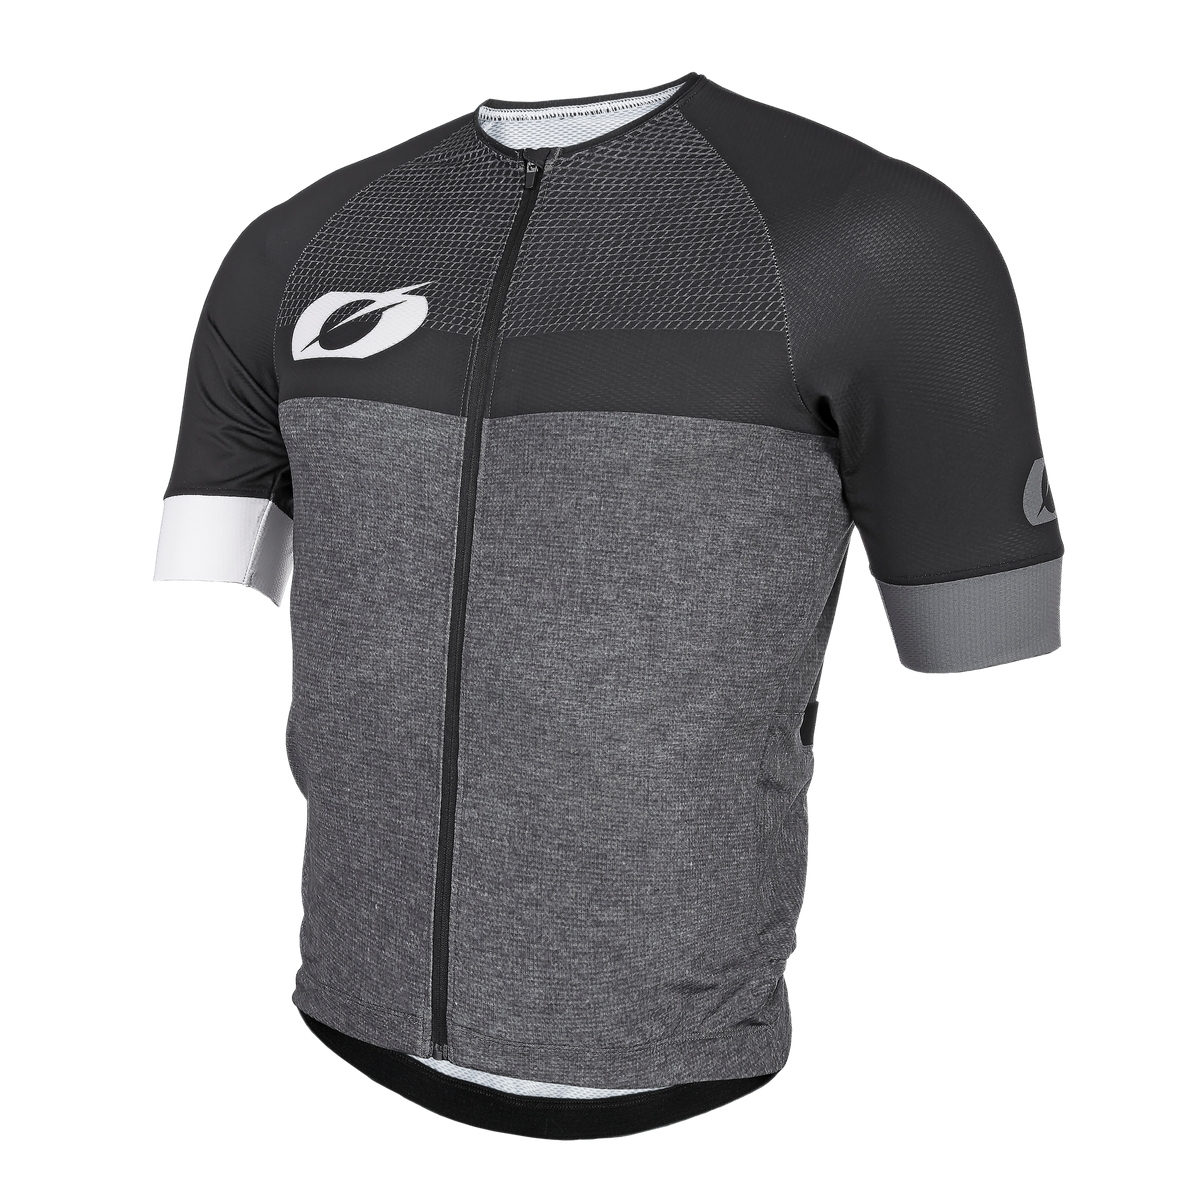 https://cdn.oneal.eu/assets/importedProductImages/CLOTHING/MTB/AERIAL/SPLIT/black_gray/2021_ONeal_AERIAL_Jersey_SPLIT_black_gray_front.png